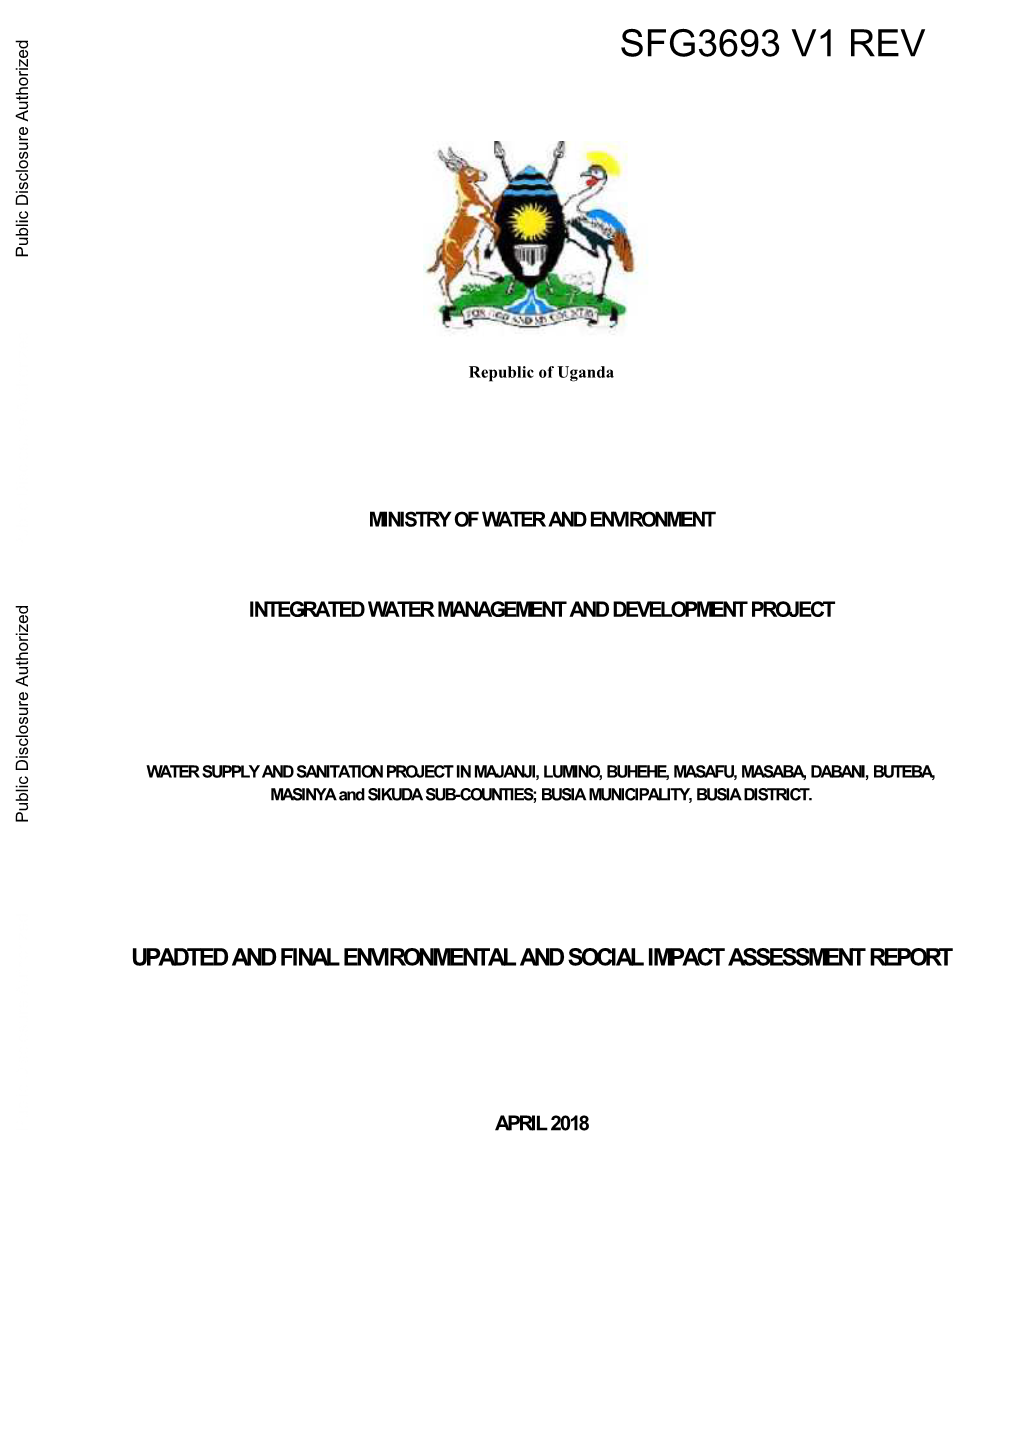 Integrated Water Management and Development Project